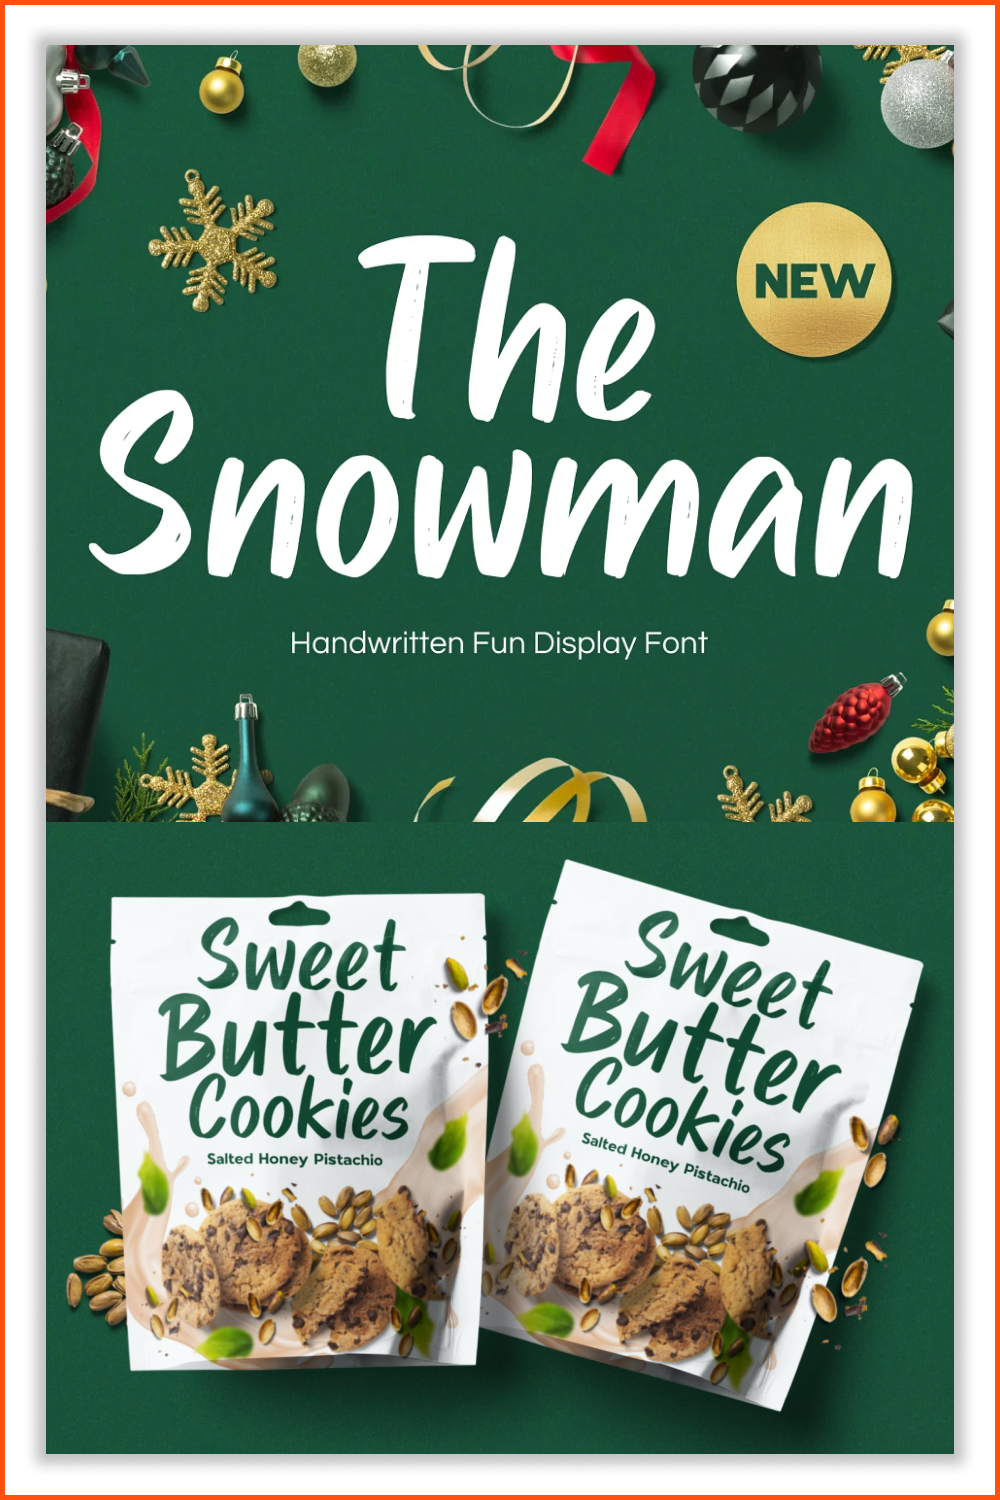 Beautiful handwritten font on a green background and on the package of cookies.